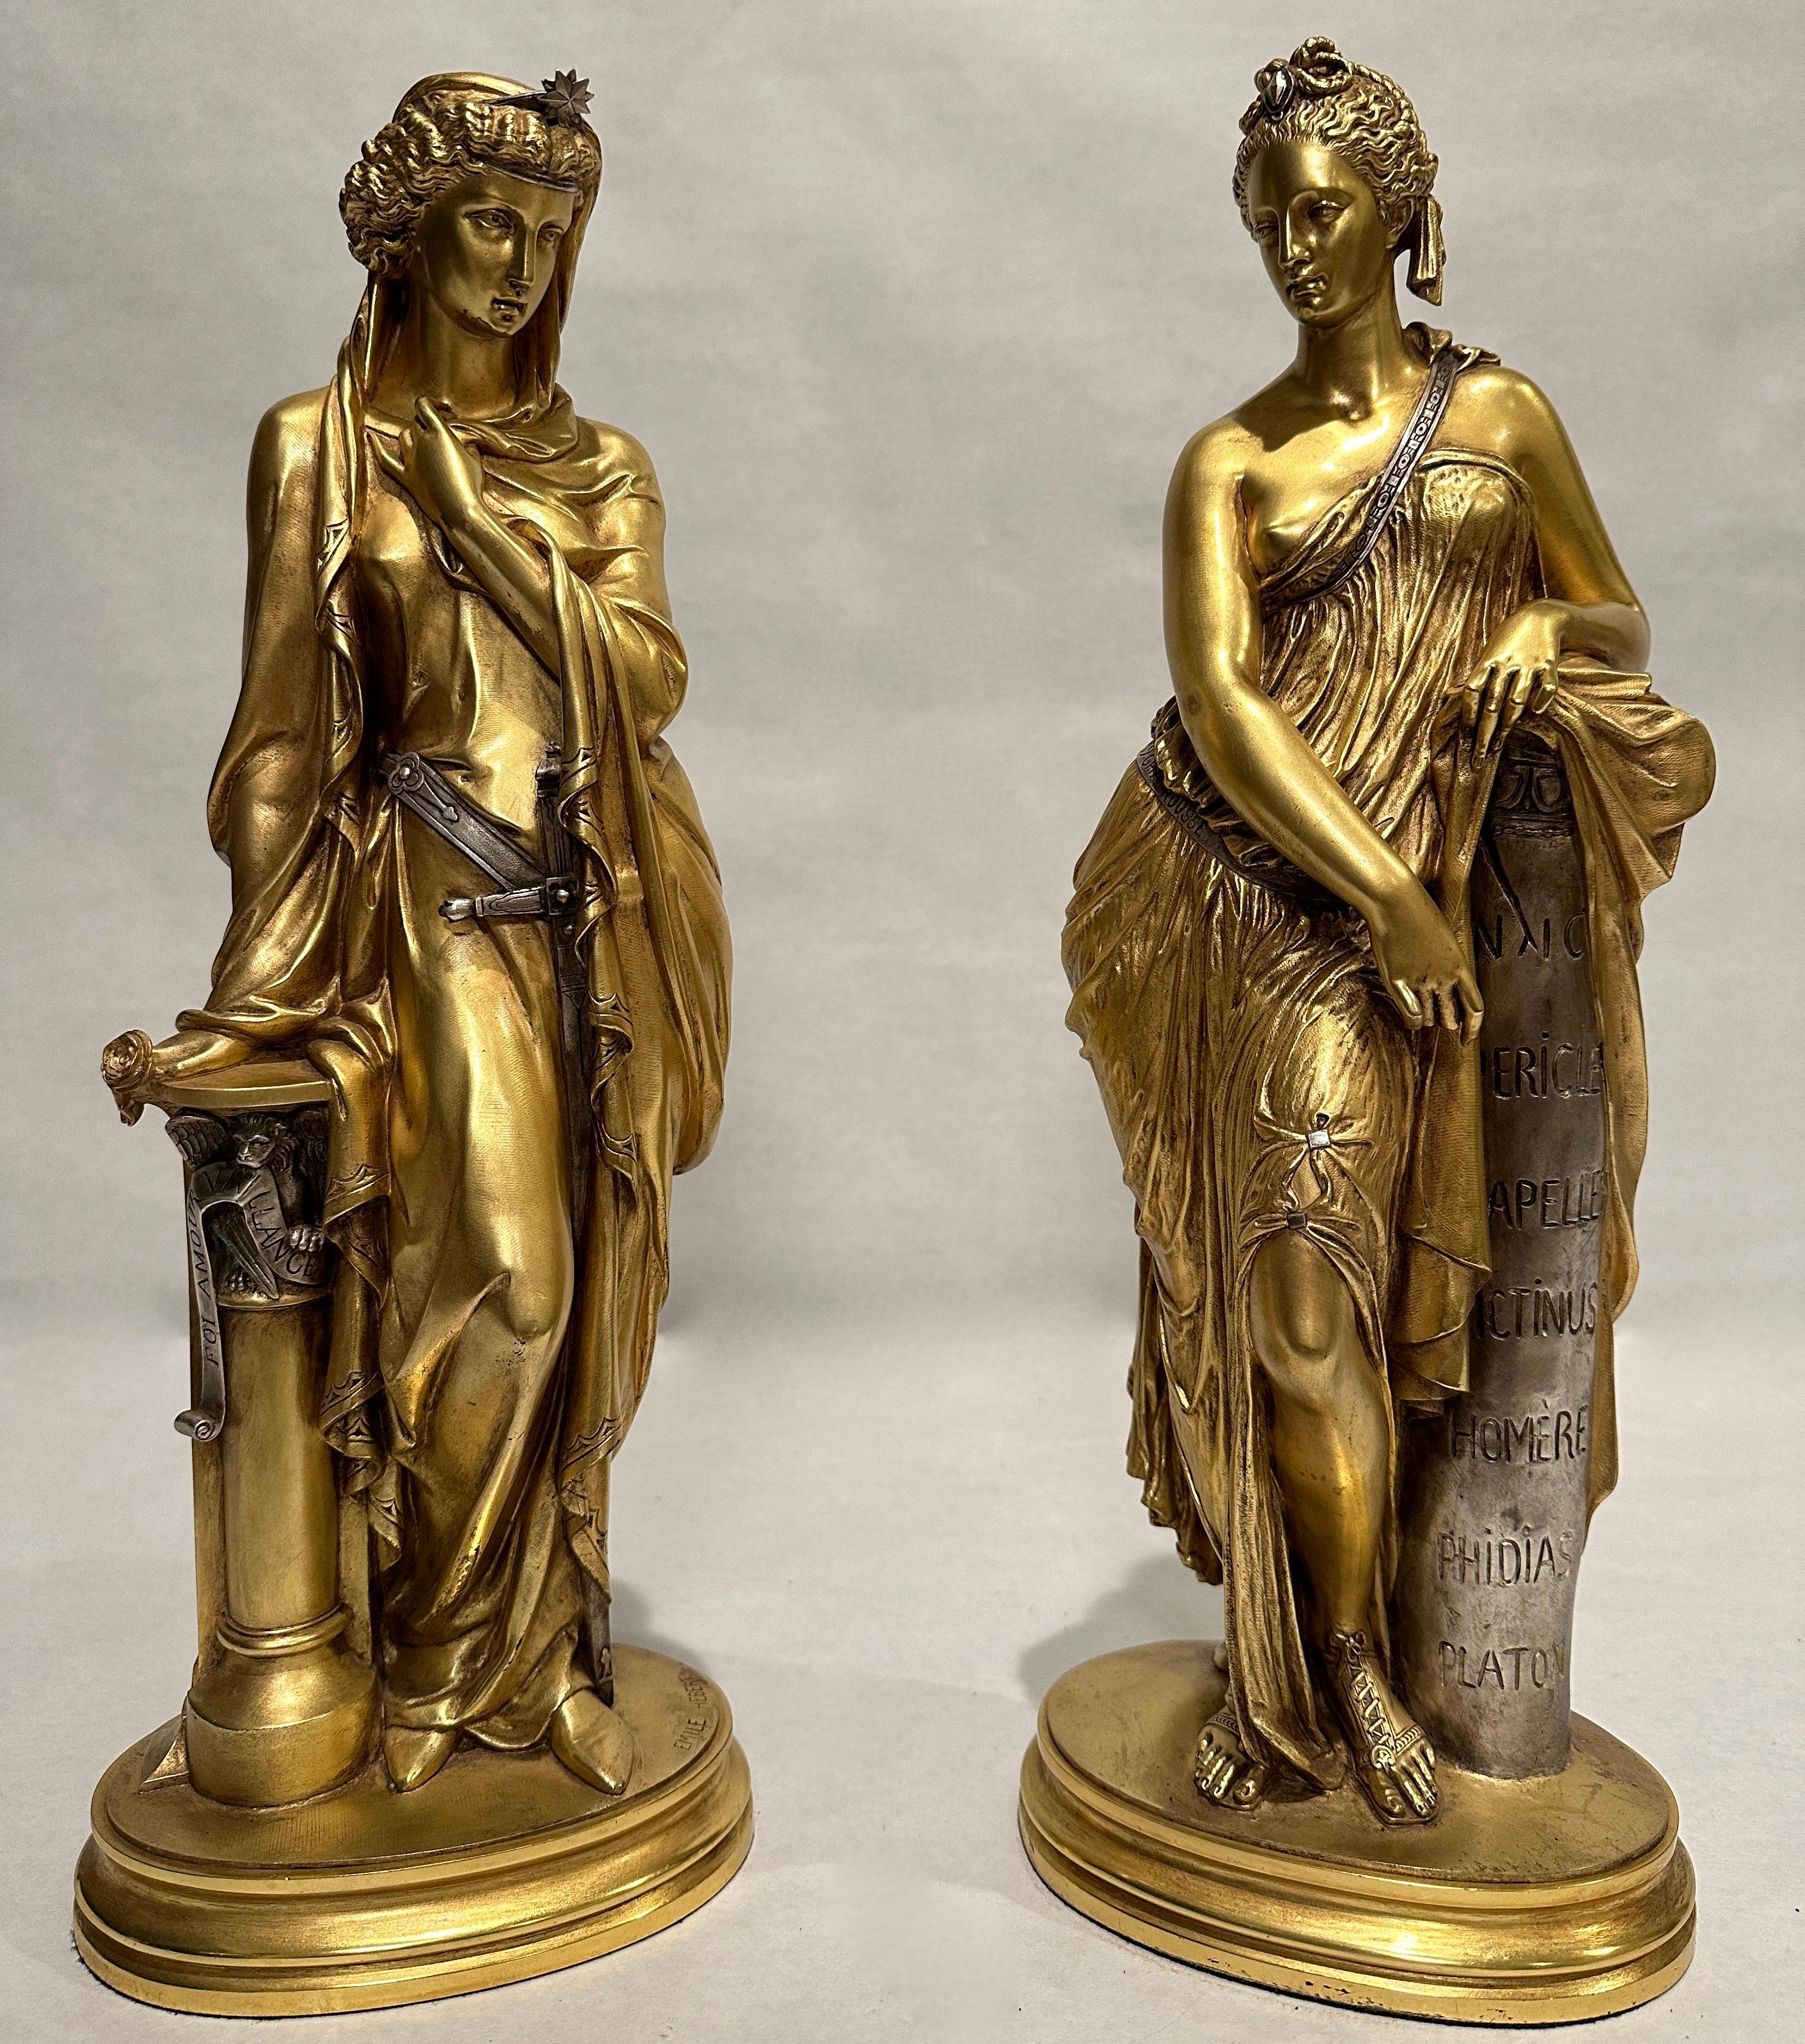 Rare pair of bronze sculptures by Emile Herbért. Fine quality silvered and gilt bronze figures of a warrior woman and a poet women dressed accordingly with military attire and poetic words. Signed and foundry marked with the G. Servant mark.